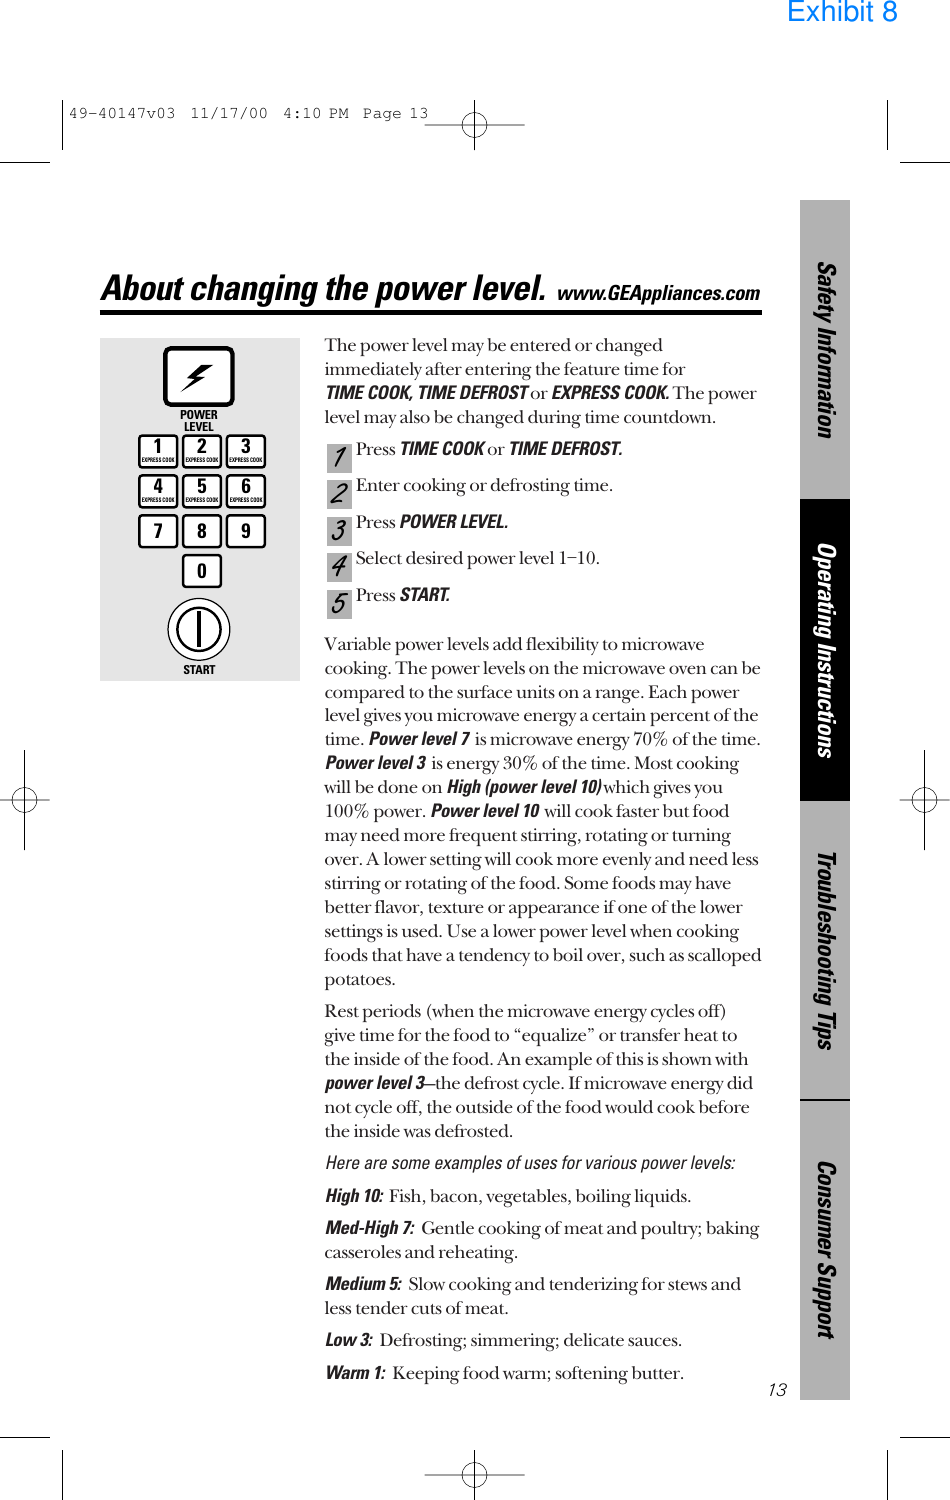 The power level may be entered or changedimmediately after entering the feature time for TIME COOK, TIME DEFROSTor EXPRESS COOK.The powerlevel may also be changed during time countdown.Press TIME COOK or TIME DEFROST.Enter cooking or defrosting time.Press POWER LEVEL.Select desired power level 1–10.Press START.Variable power levels add flexibility to microwavecooking. The power levels on the microwave oven can becompared to the surface units on a range. Each powerlevel gives you microwave energy a certain percent of thetime. Power level 7is microwave energy 70% of the time.Power level 3is energy 30% of the time. Most cookingwill be done on High (power level 10)which gives you100% power. Power level 10will cook faster but foodmay need more frequent stirring, rotating or turningover. A lower setting will cook more evenly and need lessstirring or rotating of the food. Some foods may havebetter flavor, texture or appearance if one of the lowersettings is used. Use a lower power level when cookingfoods that have a tendency to boil over, such as scallopedpotatoes.Rest periods (when the microwave energy cycles off)give time for the food to “equalize” or transfer heat tothe inside of the food. An example of this is shown withpower level 3—the defrost cycle. If microwave energy didnot cycle off, the outside of the food would cook beforethe inside was defrosted.Here are some examples of uses for various power levels:High 10:Fish, bacon, vegetables, boiling liquids.Med-High 7:  Gentle cooking of meat and poultry; bakingcasseroles and reheating.Medium 5:  Slow cooking and tenderizing for stews andless tender cuts of meat.Low 3:  Defrosting; simmering; delicate sauces.Warm 1:  Keeping food warm; softening butter.54321Consumer SupportTroubleshooting TipsOperating InstructionsSafety Information13About changing the power level.www.GEAppliances.com1EXPRESS COOK3EXPRESS COOK2EXPRESS COOK5EXPRESS COOK6EXPRESS COOK78904EXPRESS COOKPOWERLEVELSTART49-40147v03  11/17/00  4:10 PM  Page 13Exhibit 8